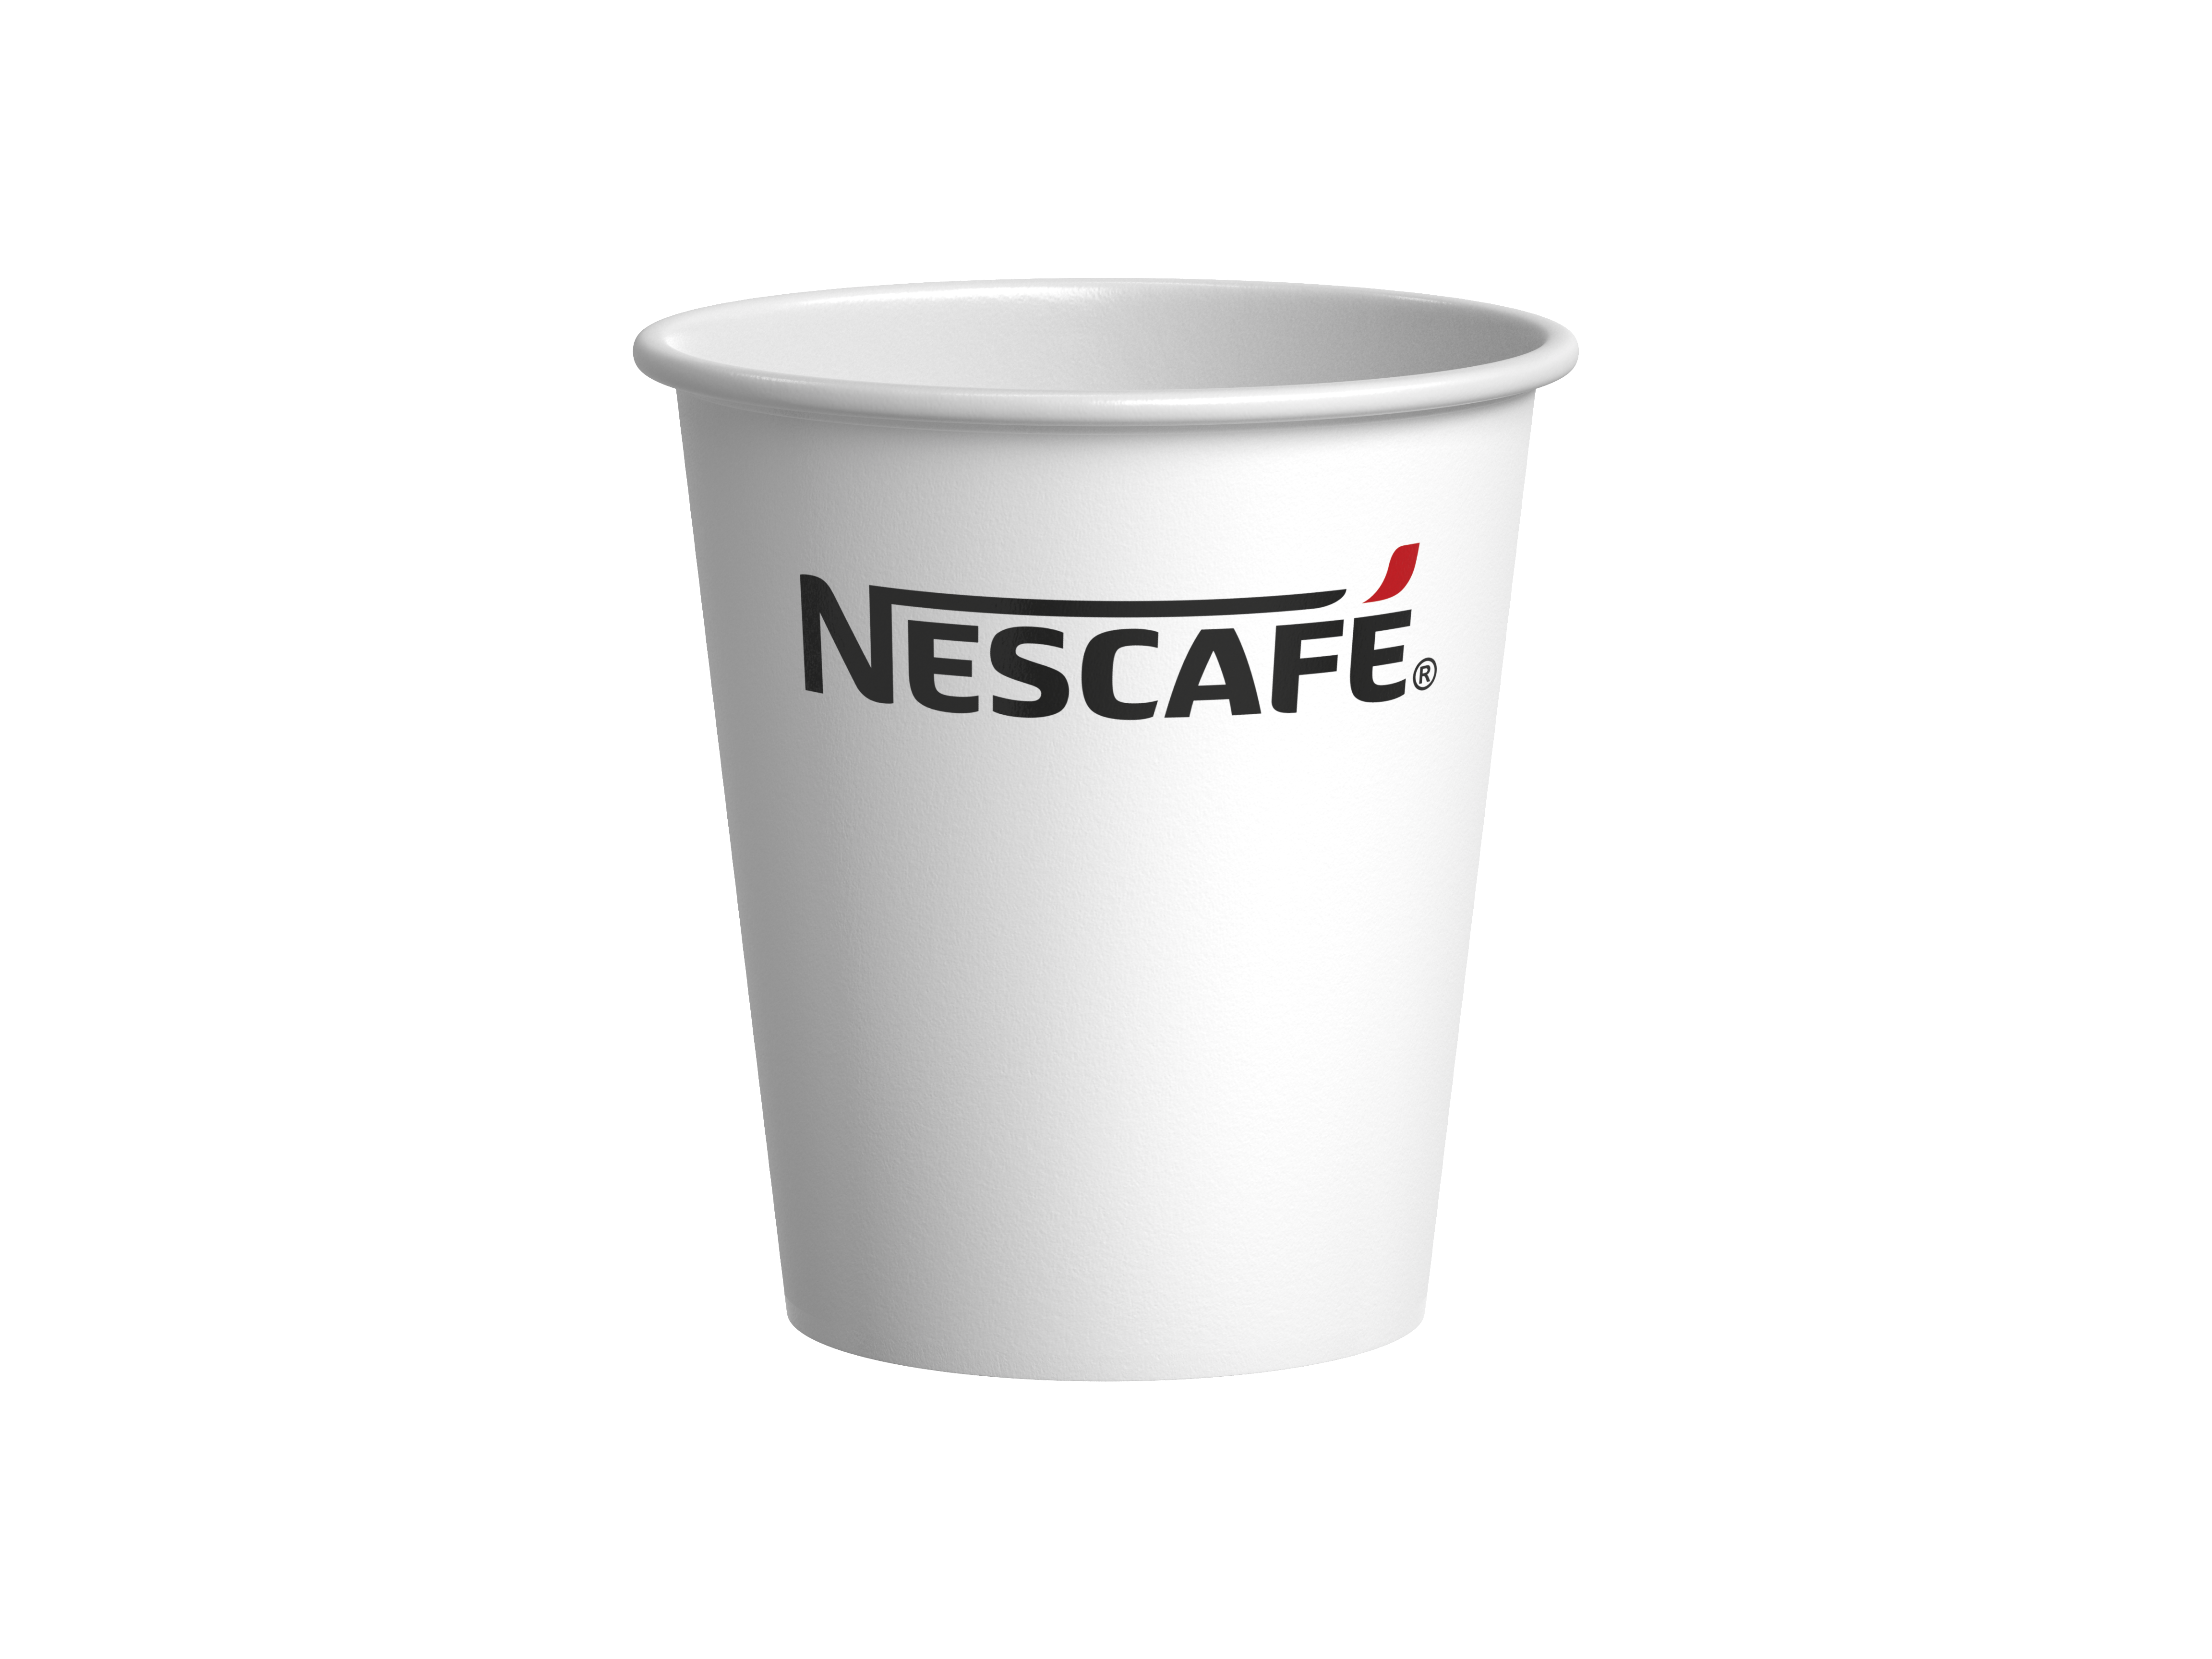 Nescafe cup front